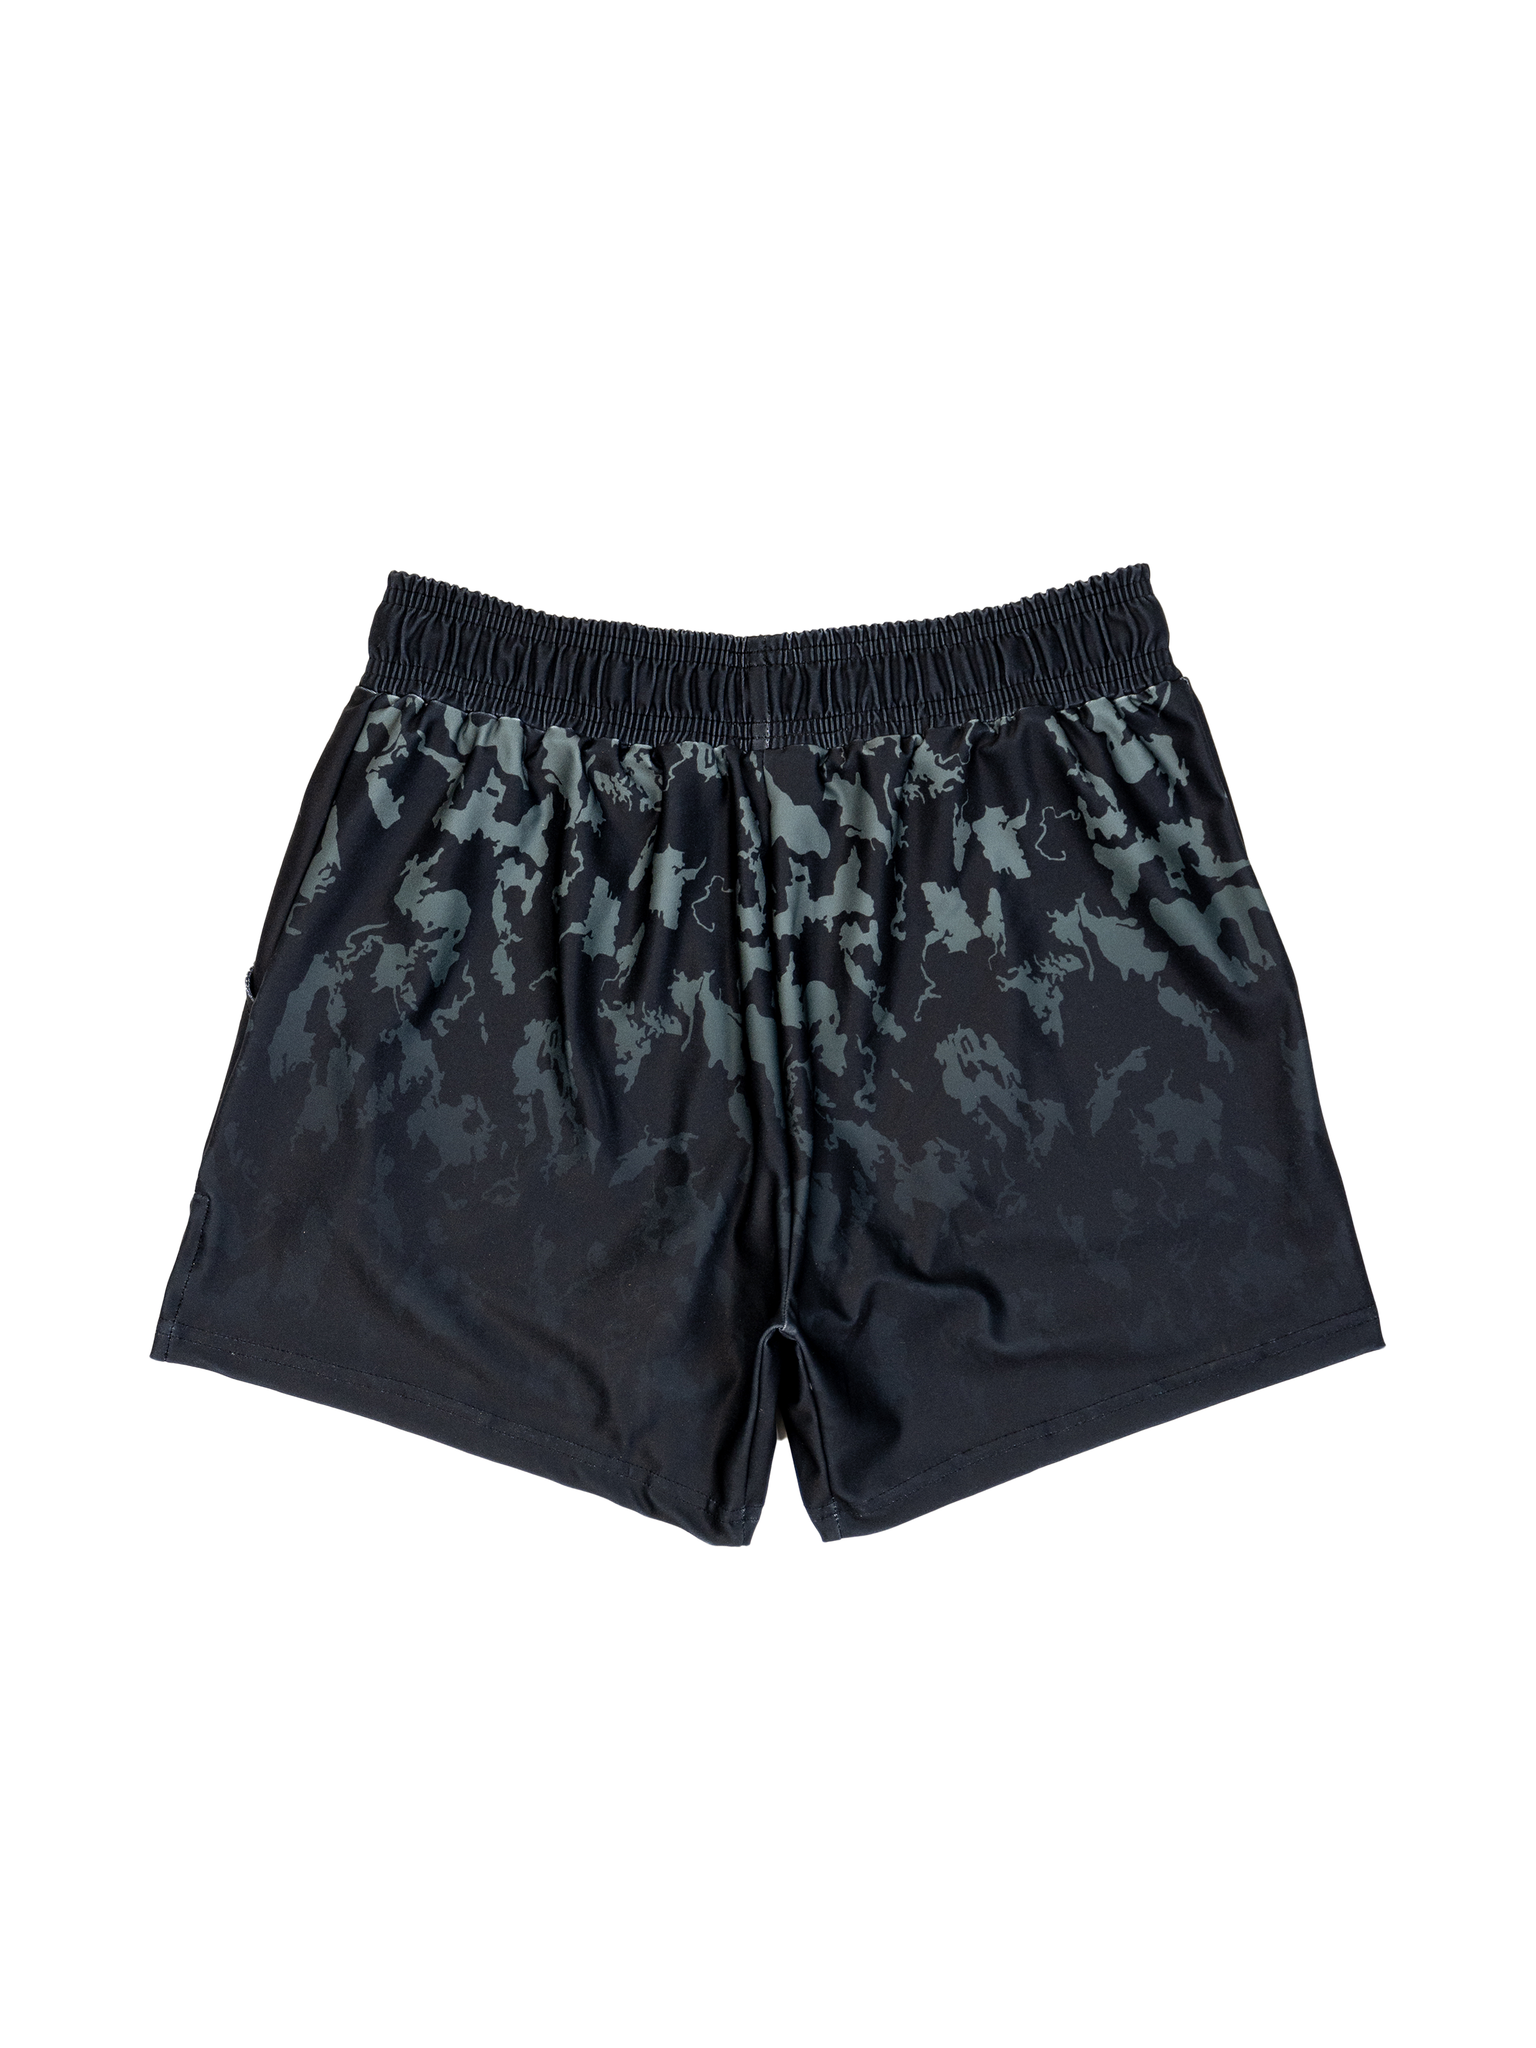 Particle Camo Gym Shorts - Onyx (5"&7" Inseam)